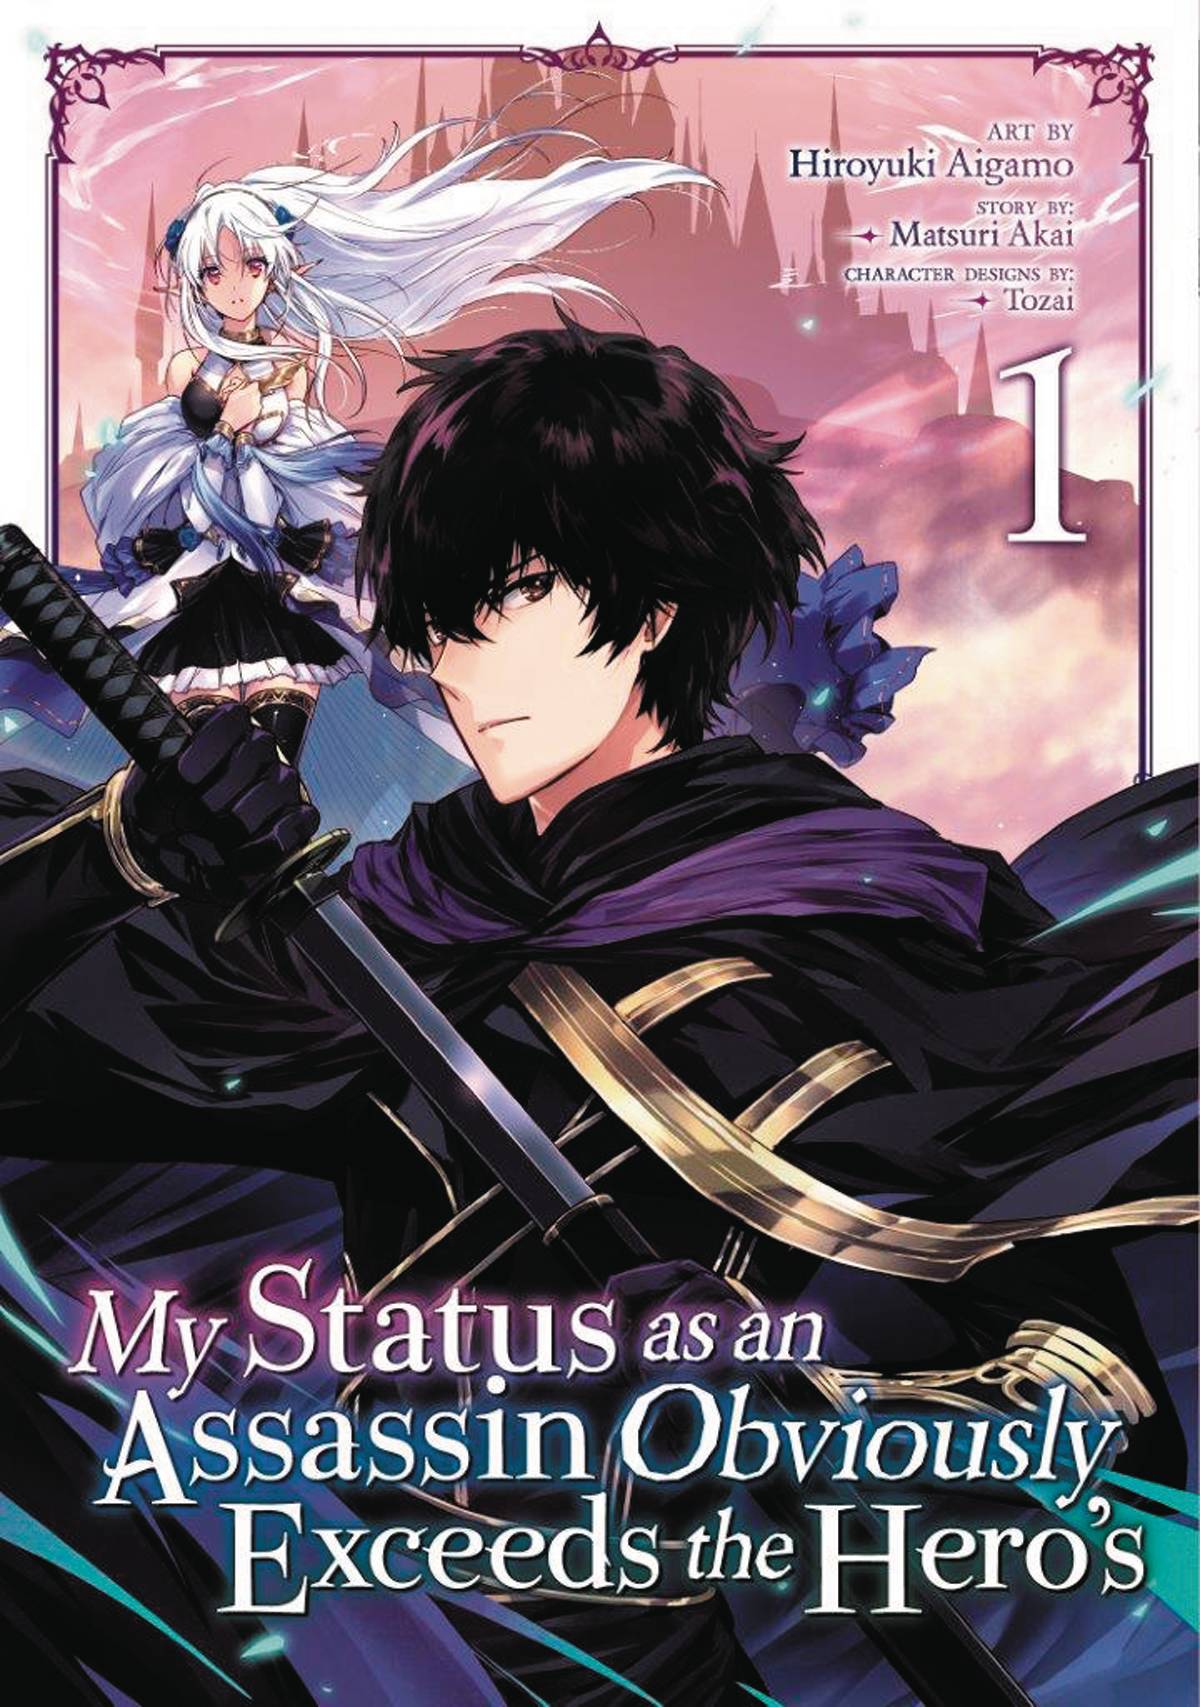 My Status as an Assassin Obviously Exceeds the Hero's Manga Volume 1